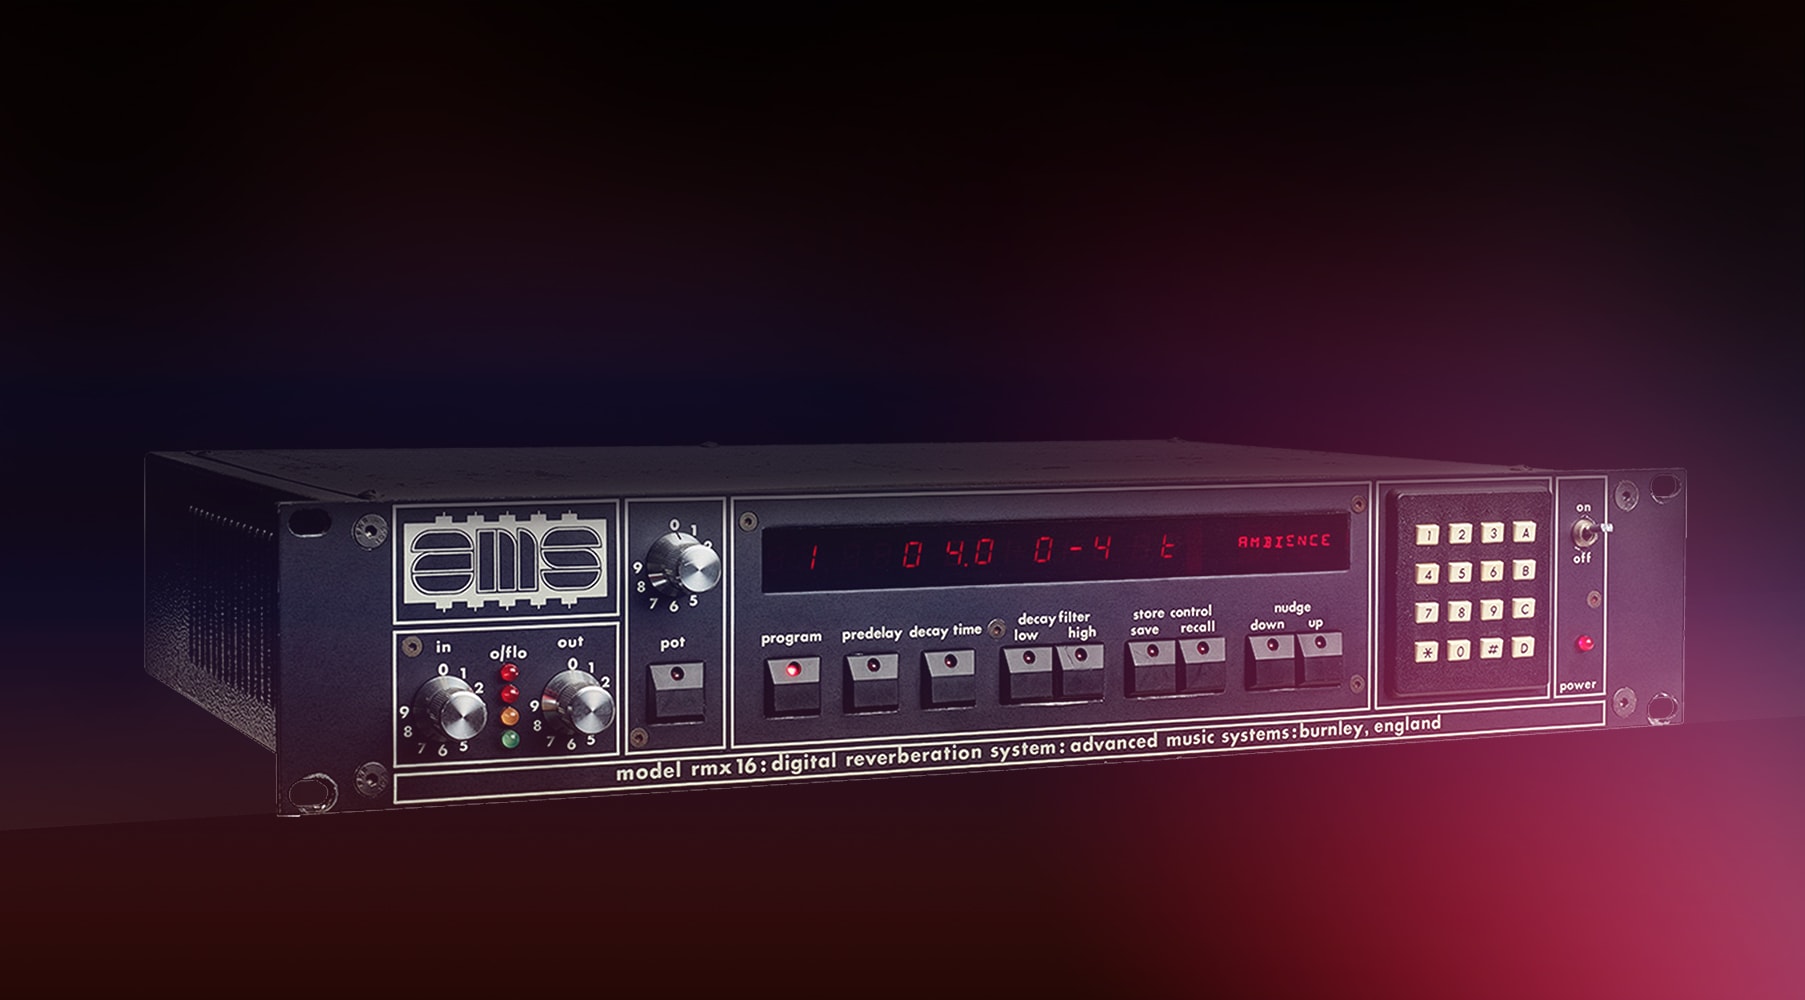 New Software Review: UAD AMS RMX16 Expanded Digital Reverb by Universal Audio